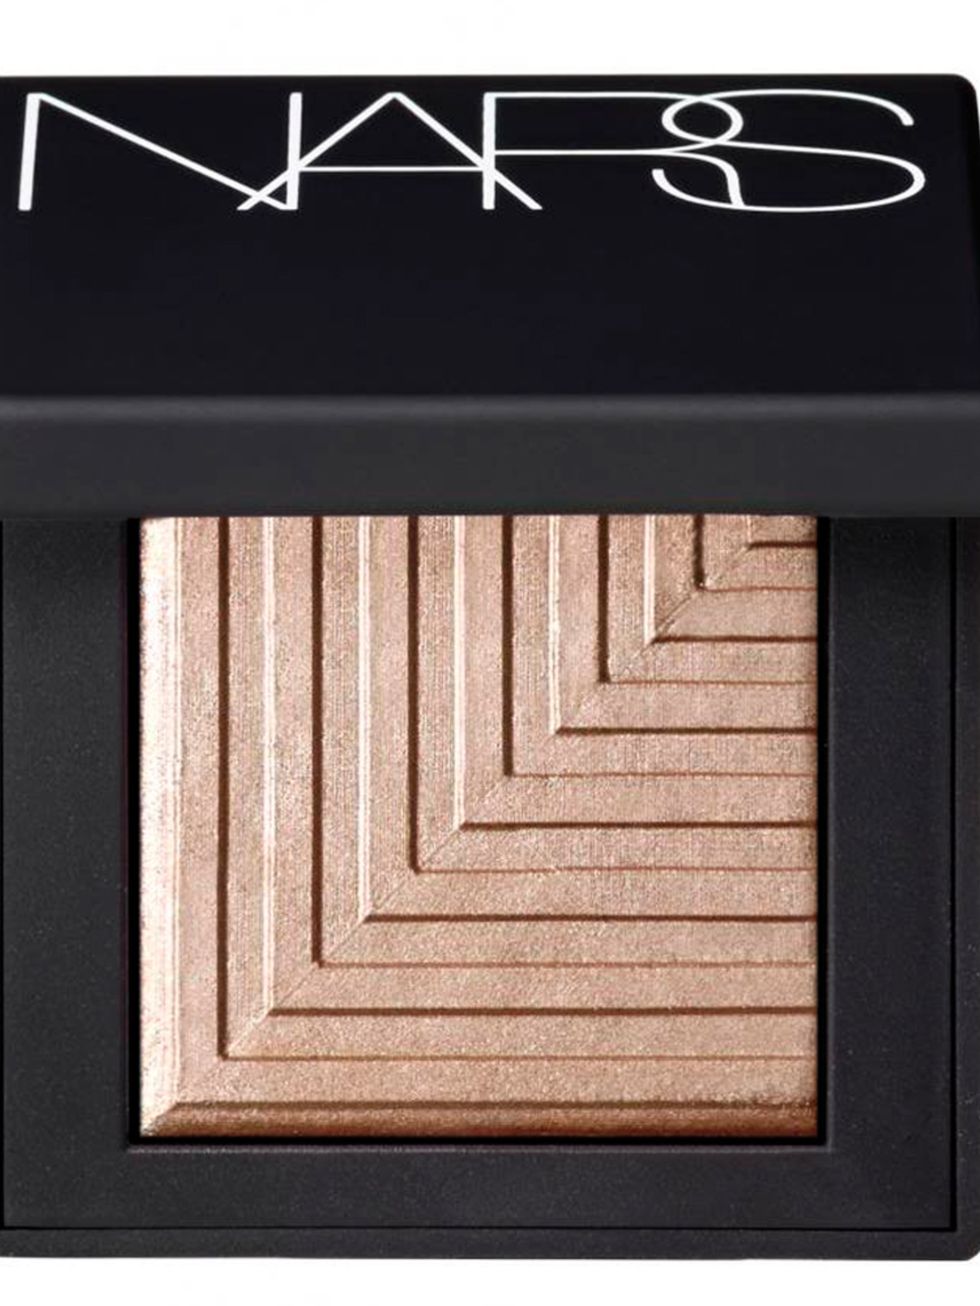 <p>Blend <a href="http://www.lookfantastic.com/nars-cosmetics-dual-intensity-eyeshadow-limited-edition/10981766.html" target="_blank">Nars Dual Intensity Shadow in Himalia, £21</a> up to the brow and in the inner corner to make eyes standout.</p>